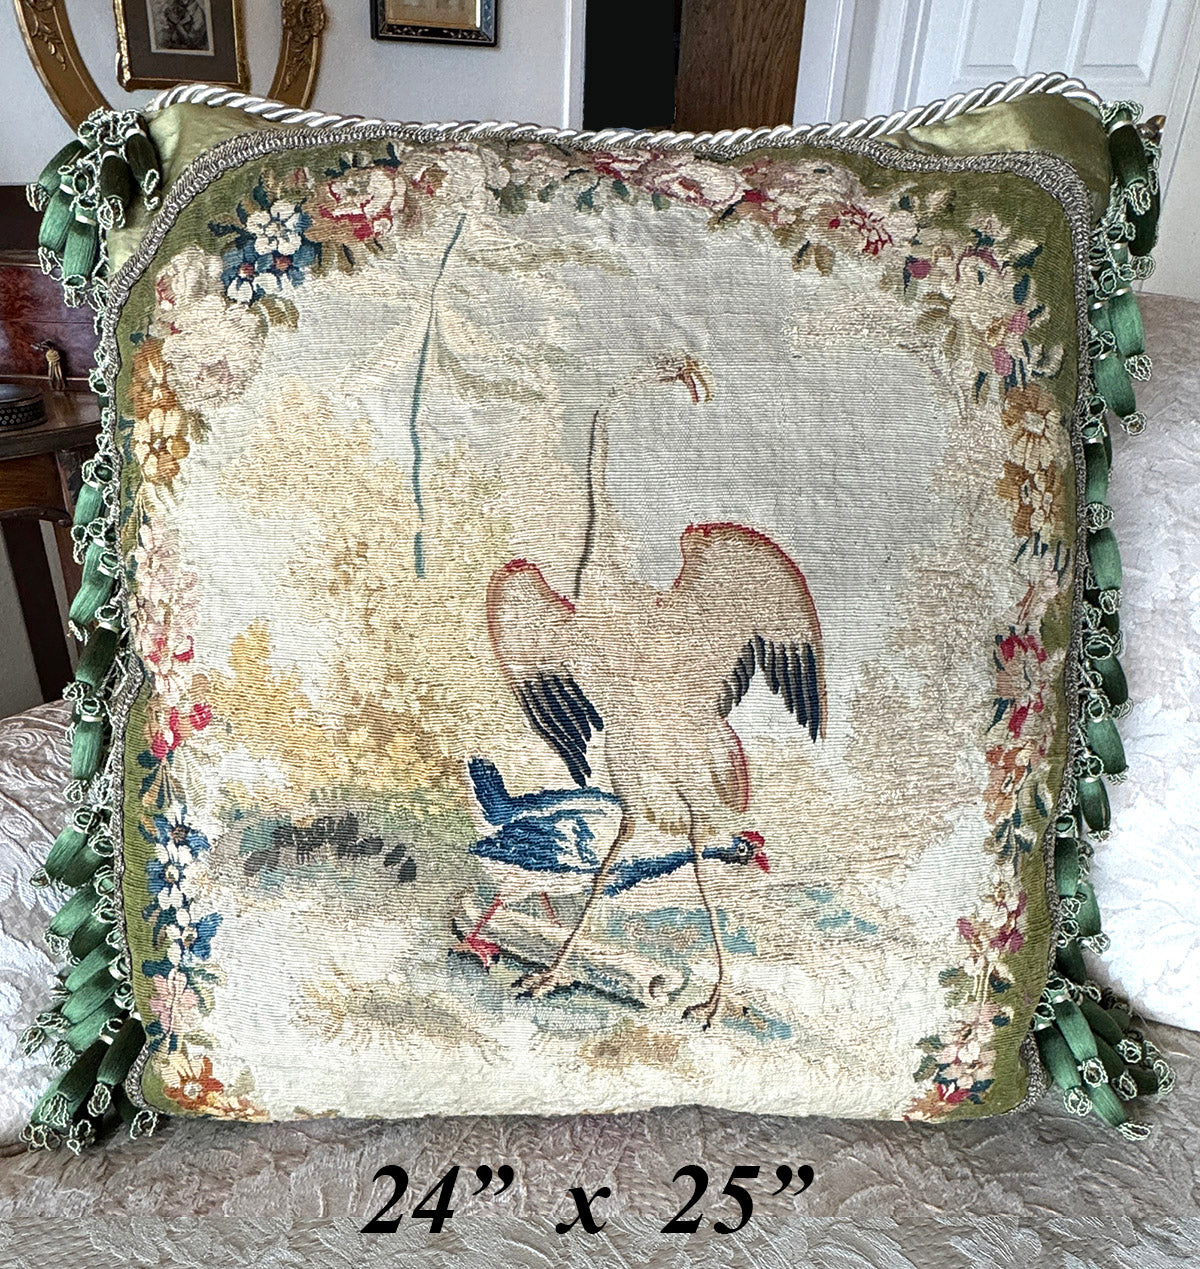 Opulent Large Antique 18th Century French Aubusson Tapestry Pillow #2, Crane, 24" x 25" + Fringe